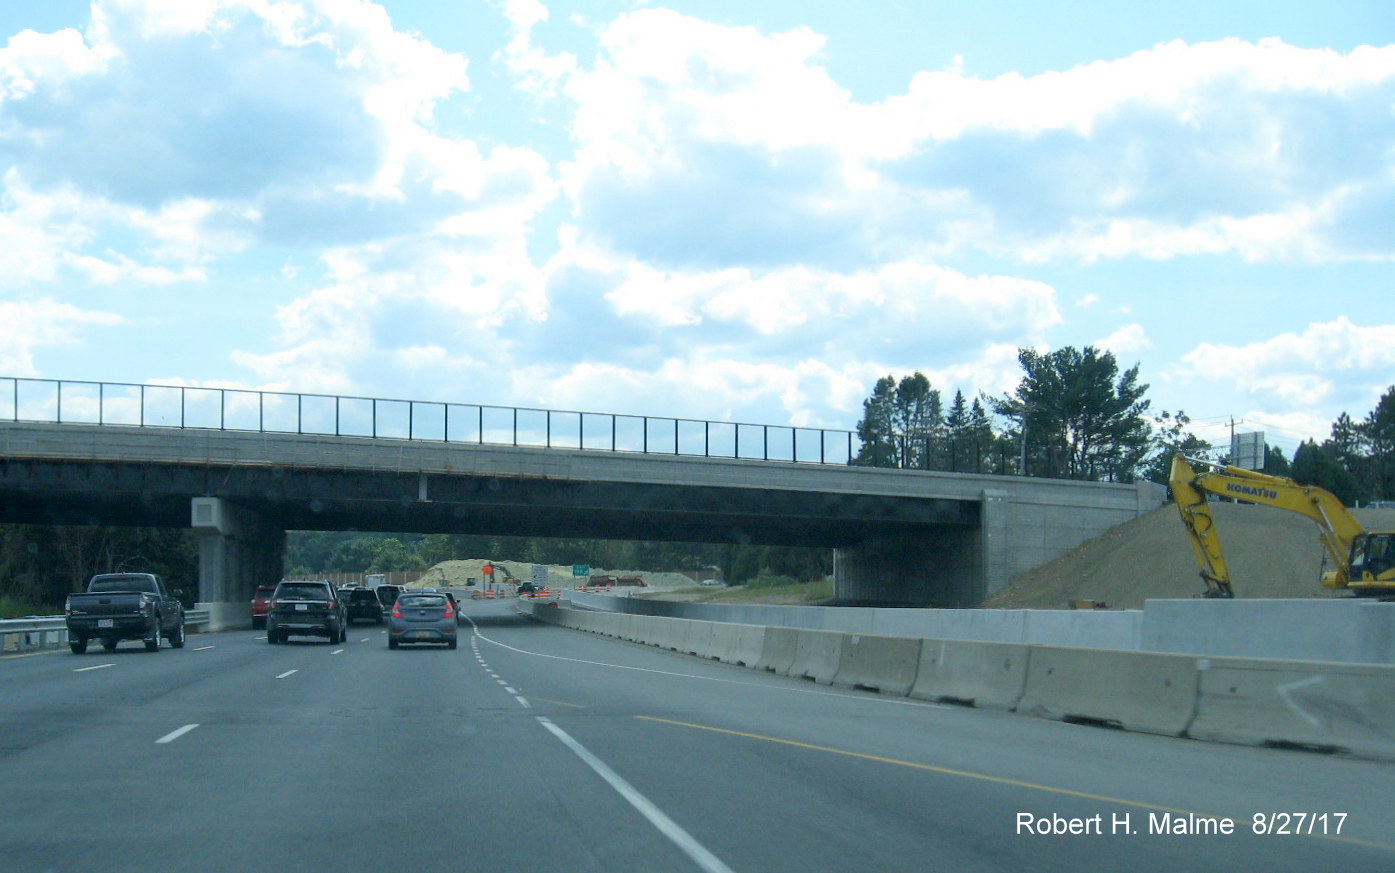 Image of Add-A-Lane Project construction approaching Highland Ave bridge on I-95 South in Needham